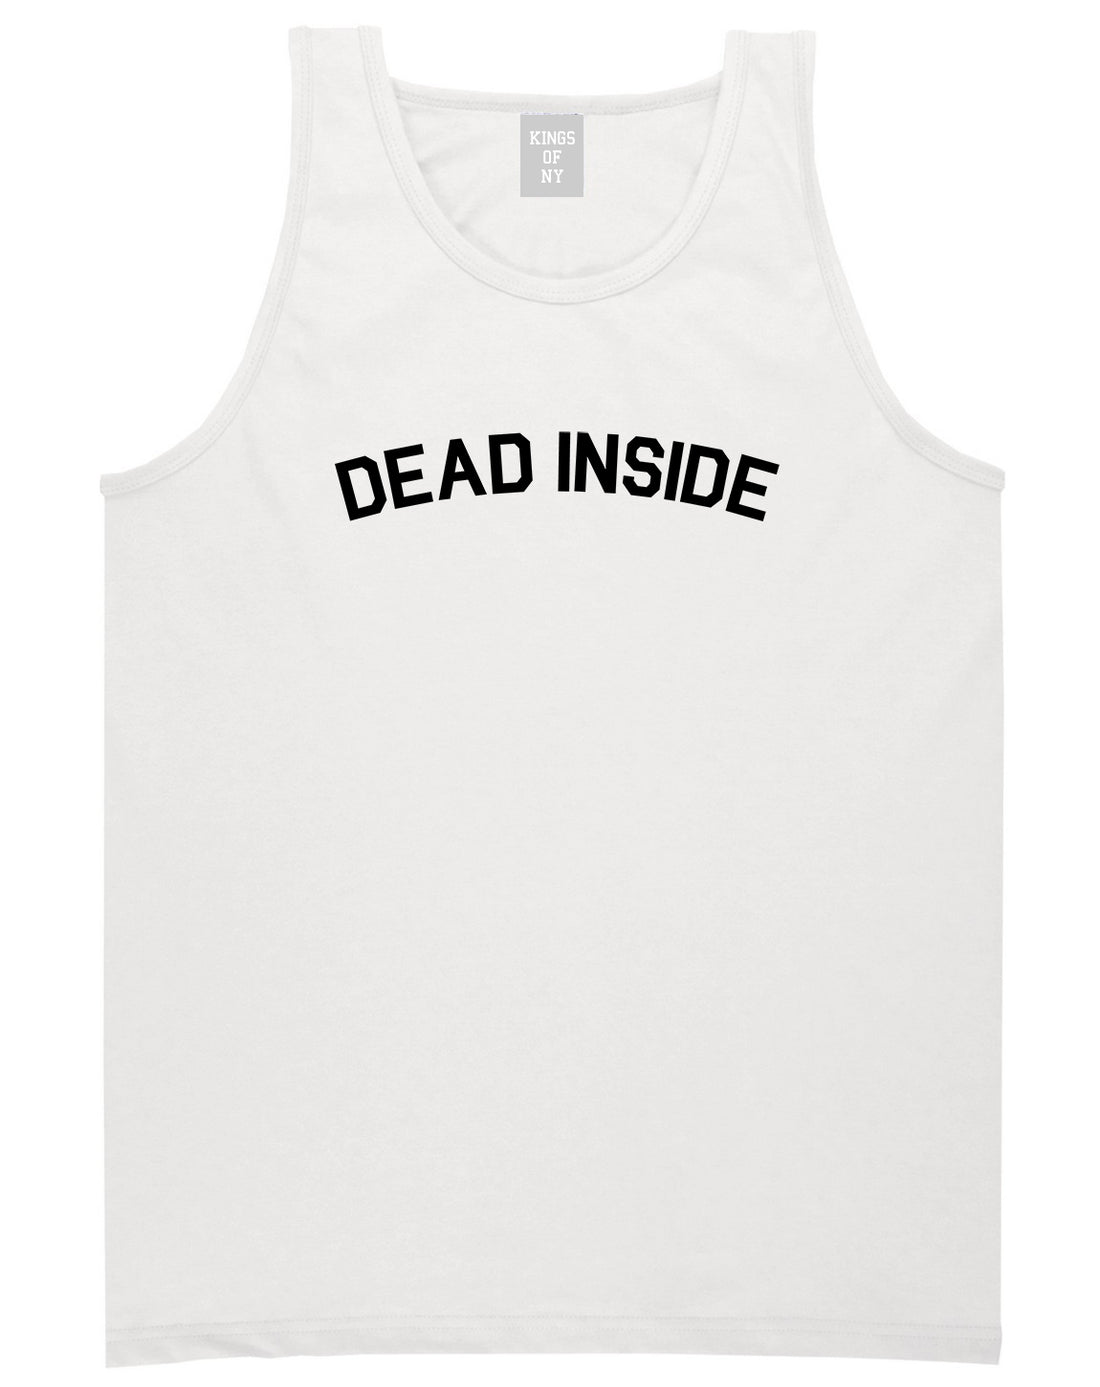 Dead Inside Arch Mens Tank Top Shirt White by Kings Of NY